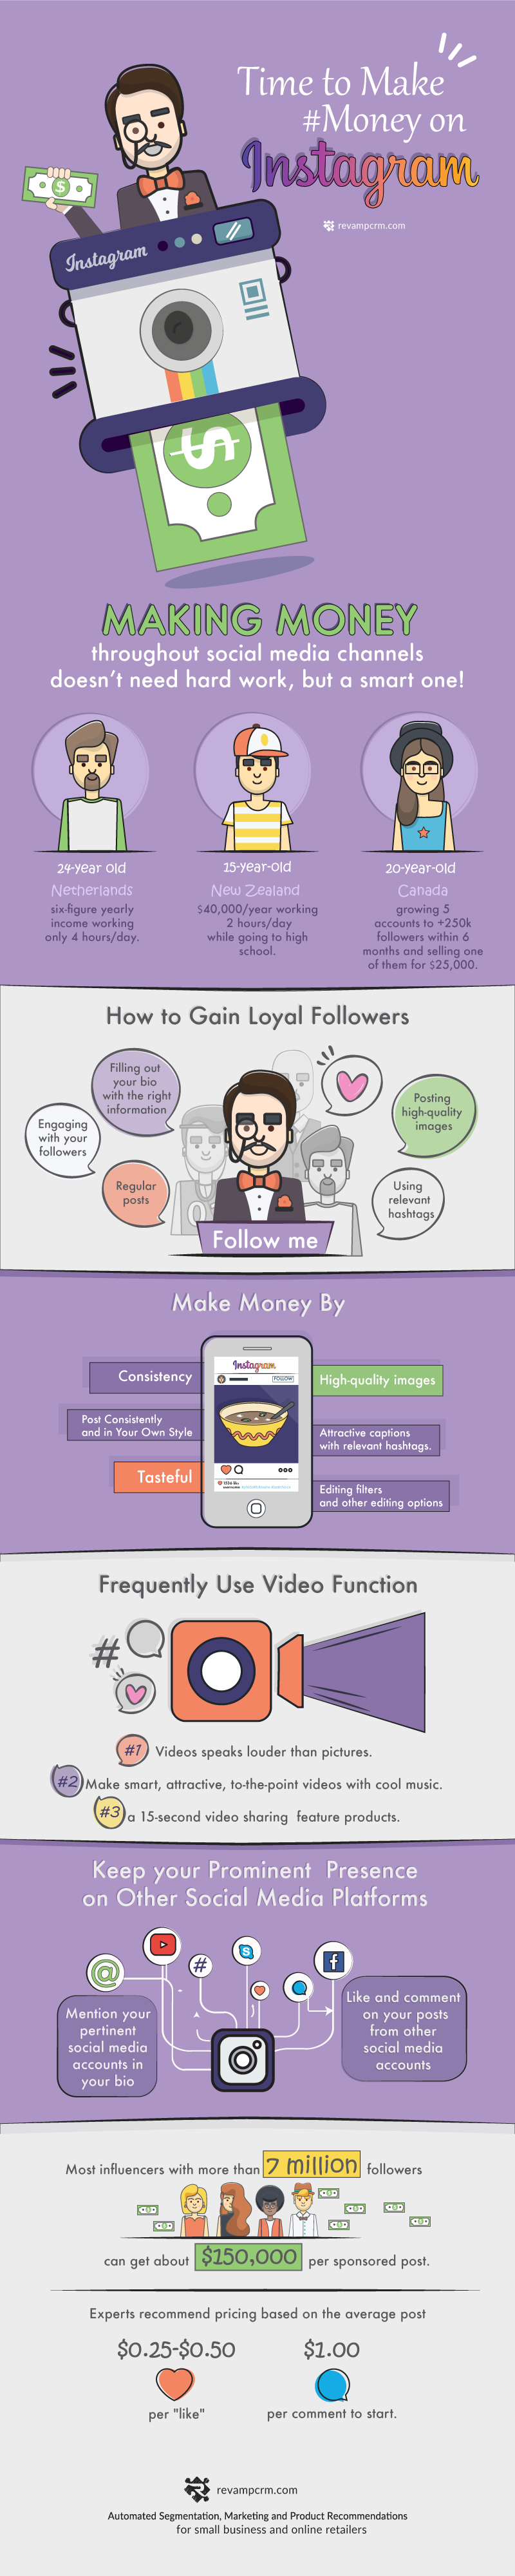 How to Make Money on Instagram - #infographic